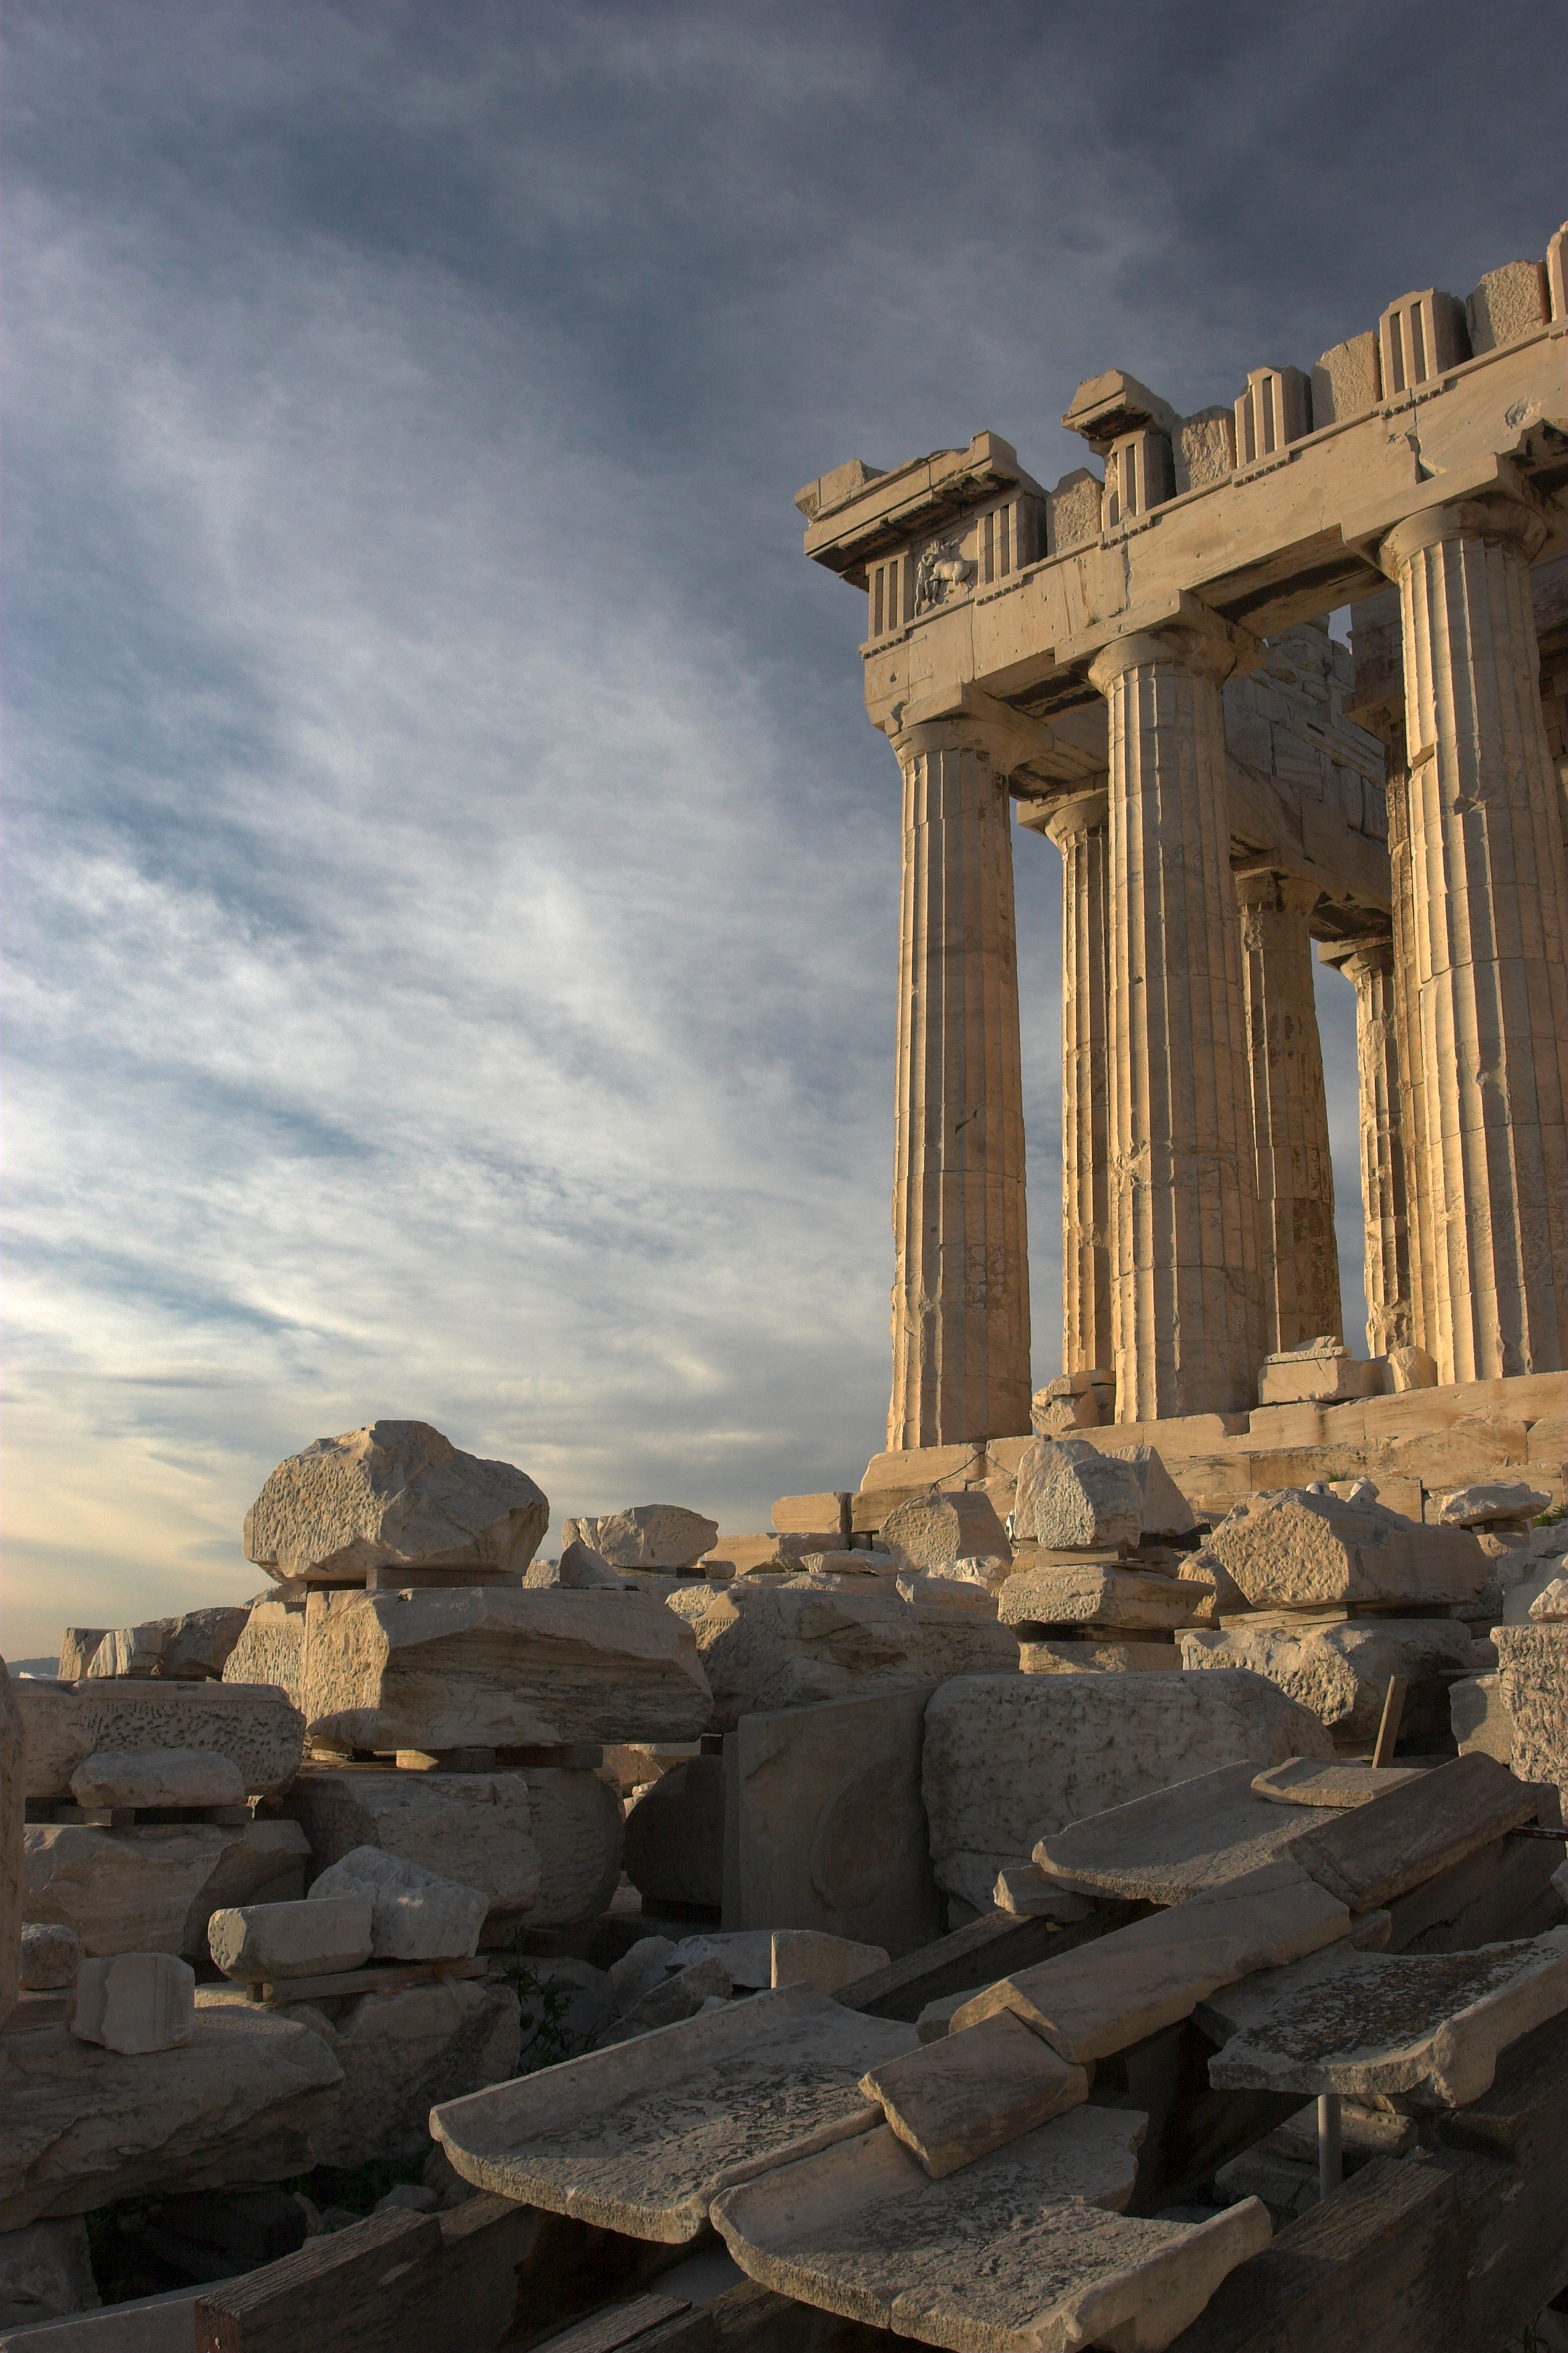 HD Quality Wallpaper | Collection: Man Made, 2345x3519 The Parthenon